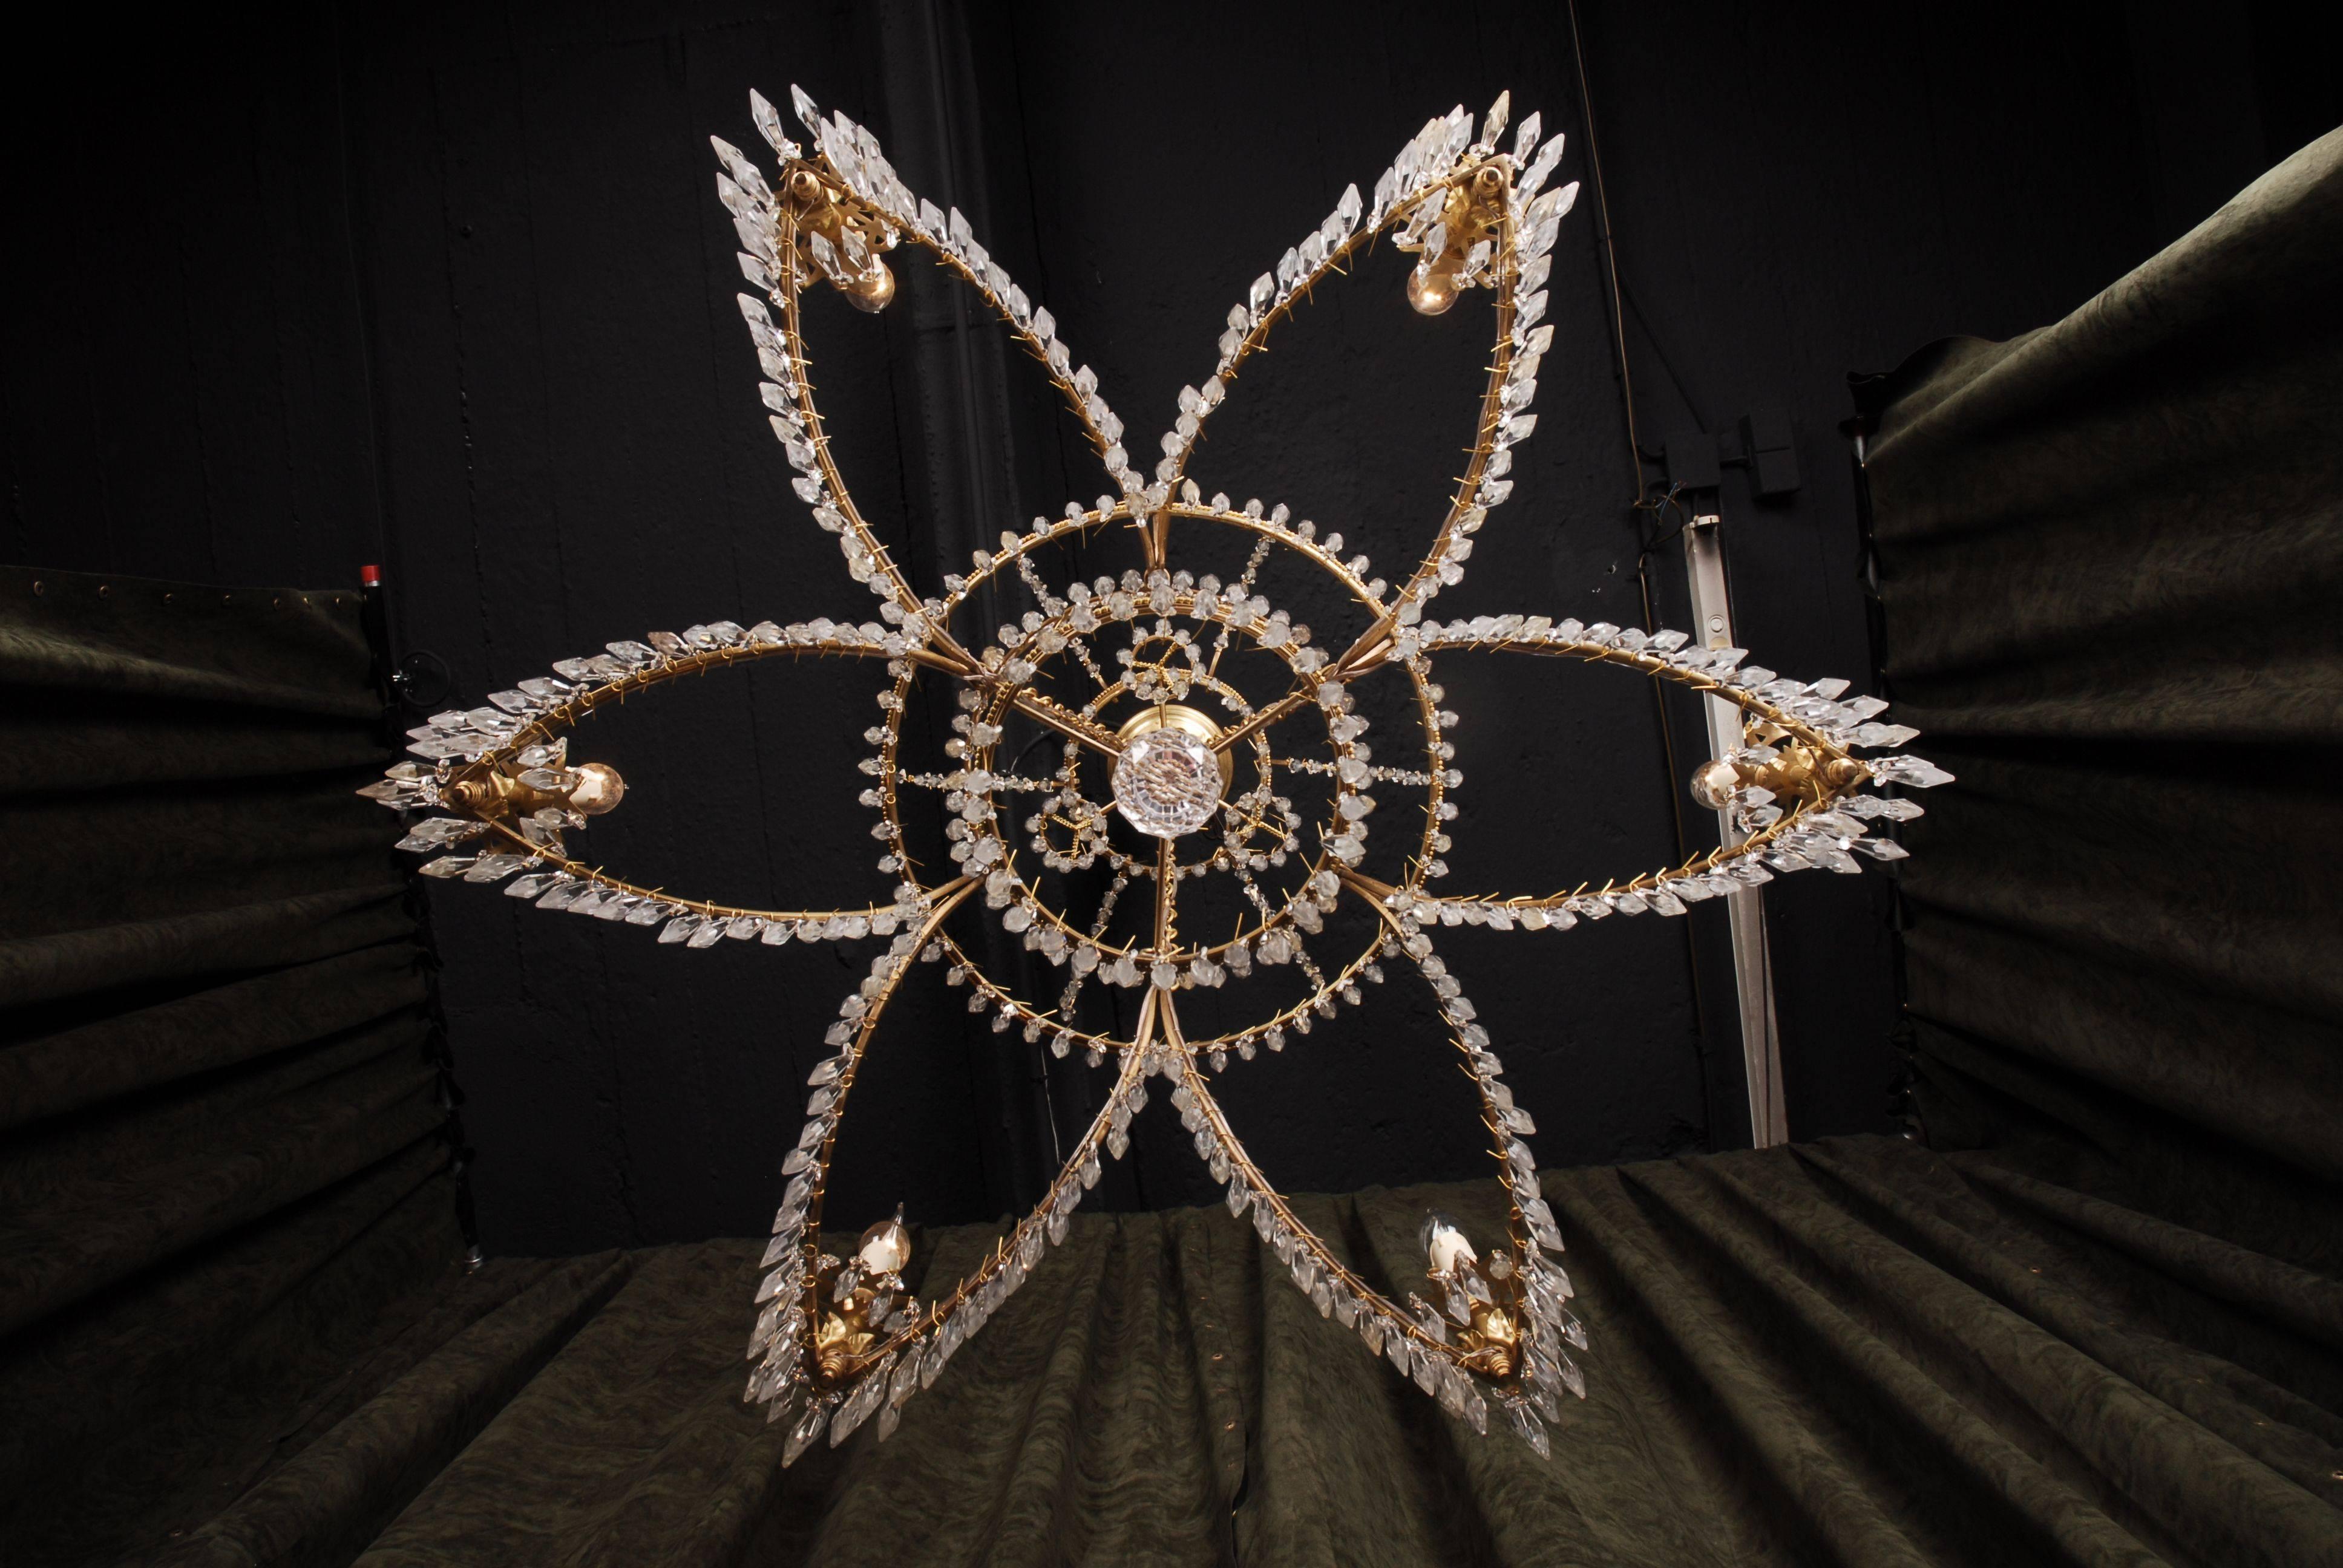 Splendid classicist Swedish ceiling candelabra.
Polished brass. Sweeping, star fomed body with drop-forming, facetted glass. There from, six-light arms ending in eave shells. Above the curved, star-formed chandelier-ring, are two juvenescent hoops